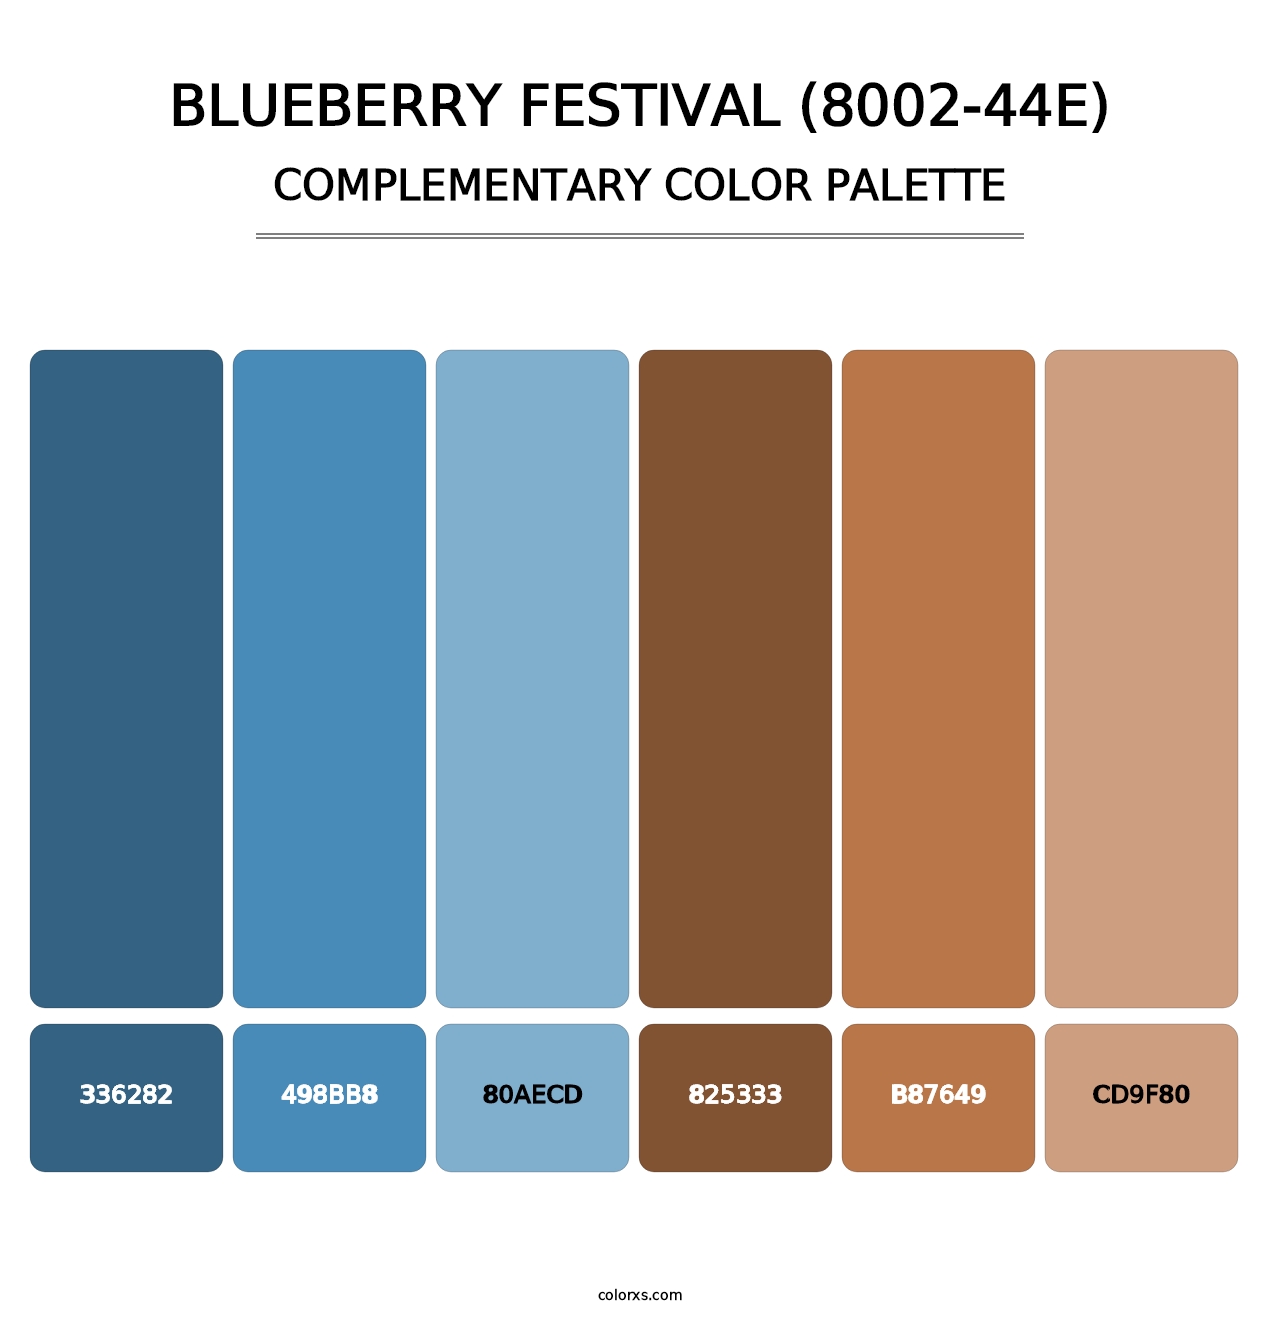 Blueberry Festival (8002-44E) - Complementary Color Palette